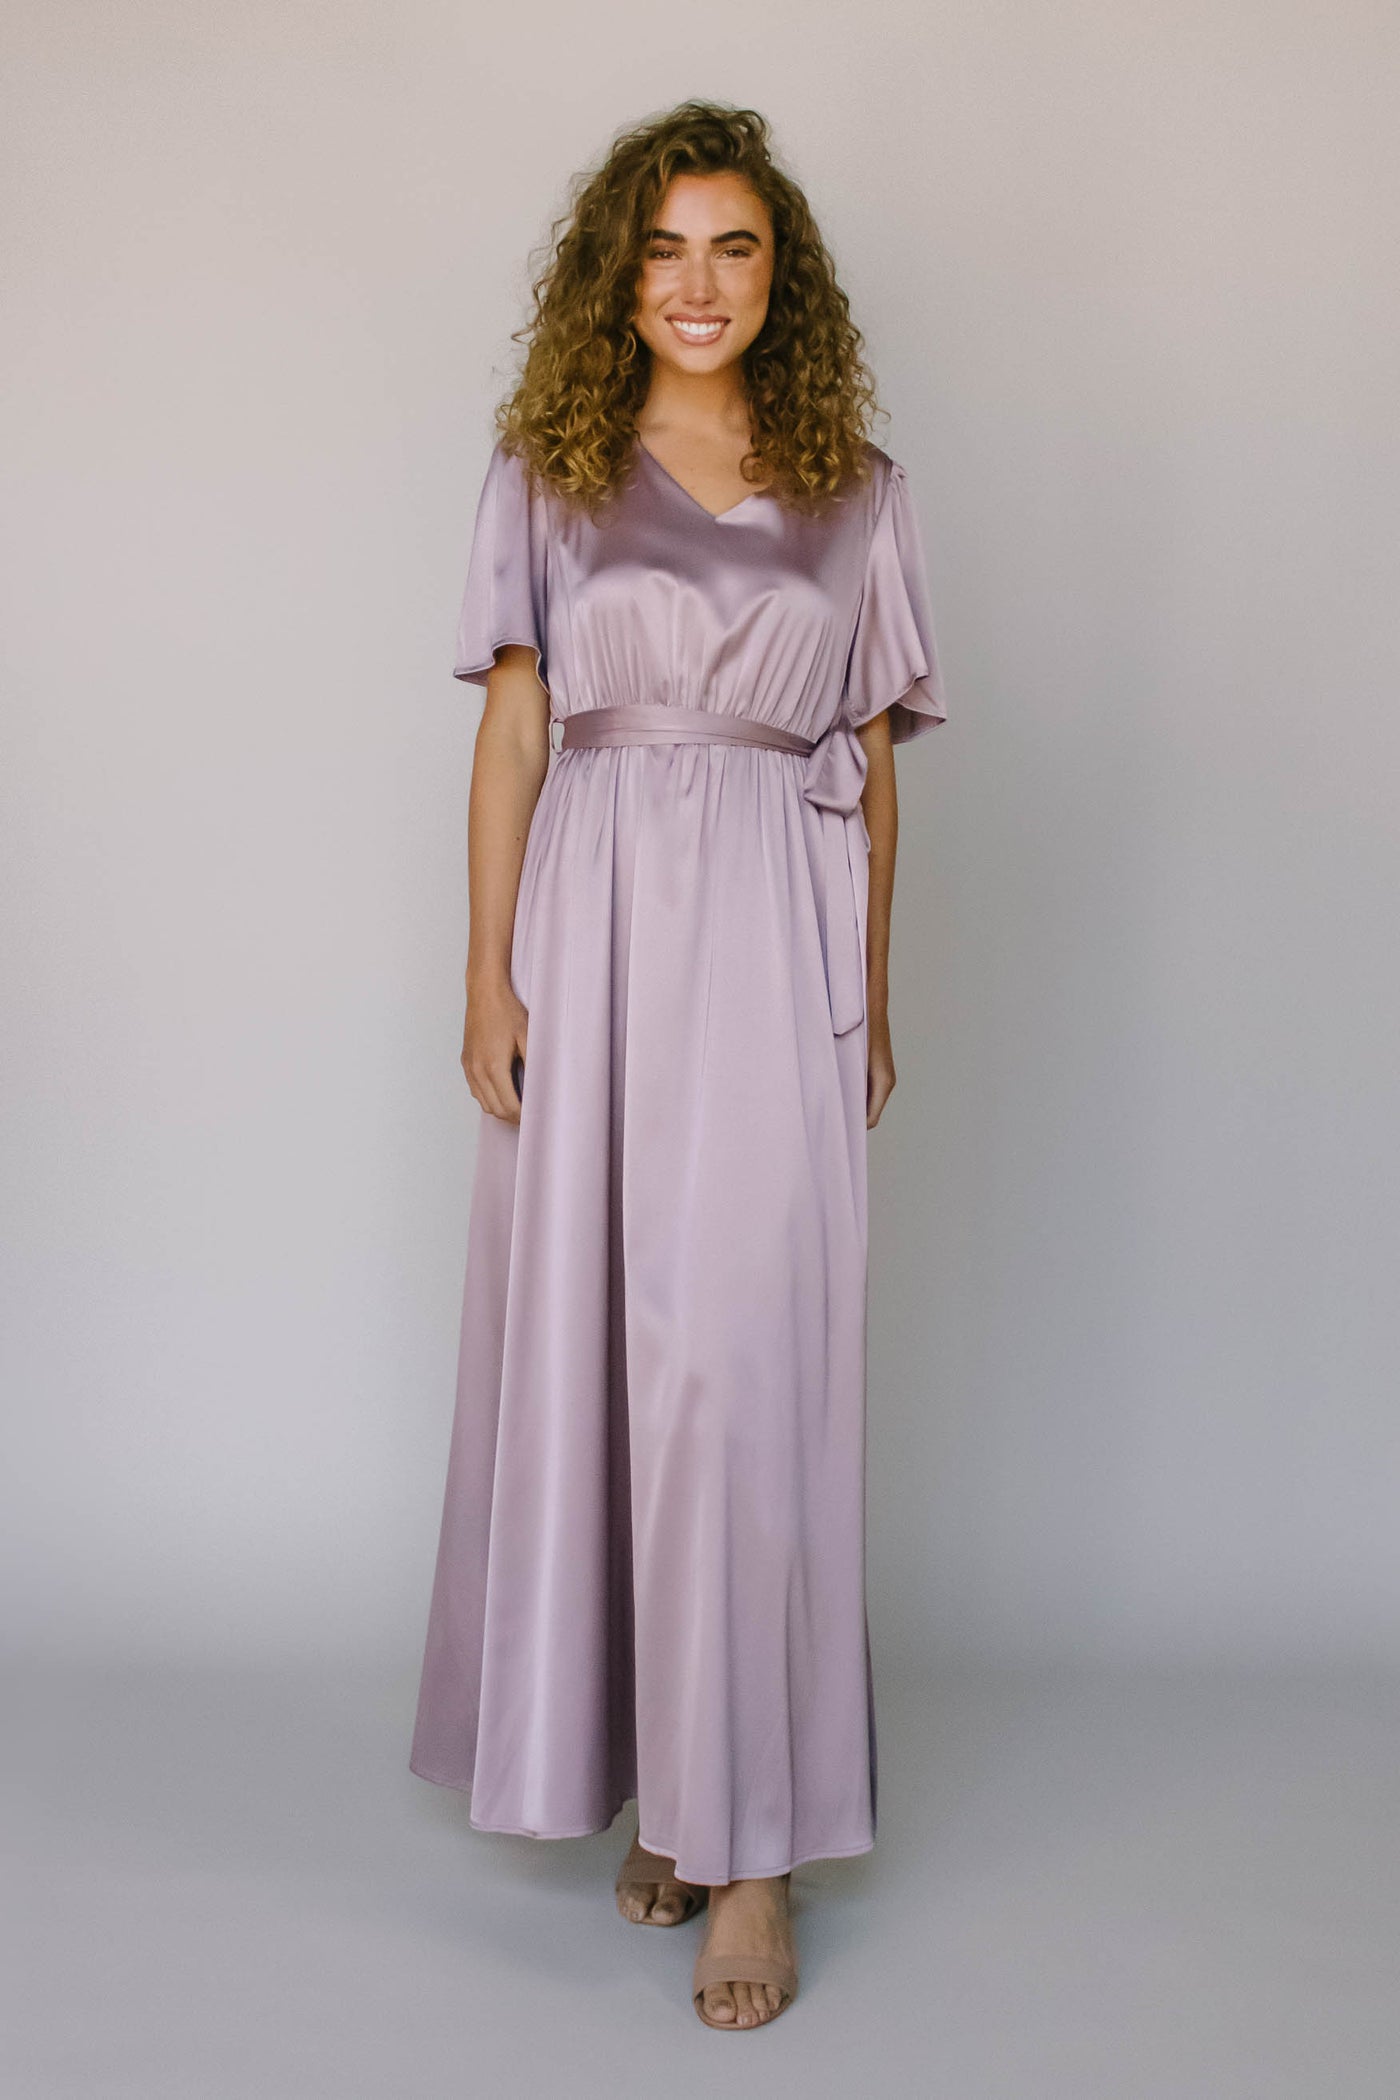 A full length modest bridesmaid dress with a silky purple fabric, flutter sleeves, v-neckline, and a tied bow on the waist.